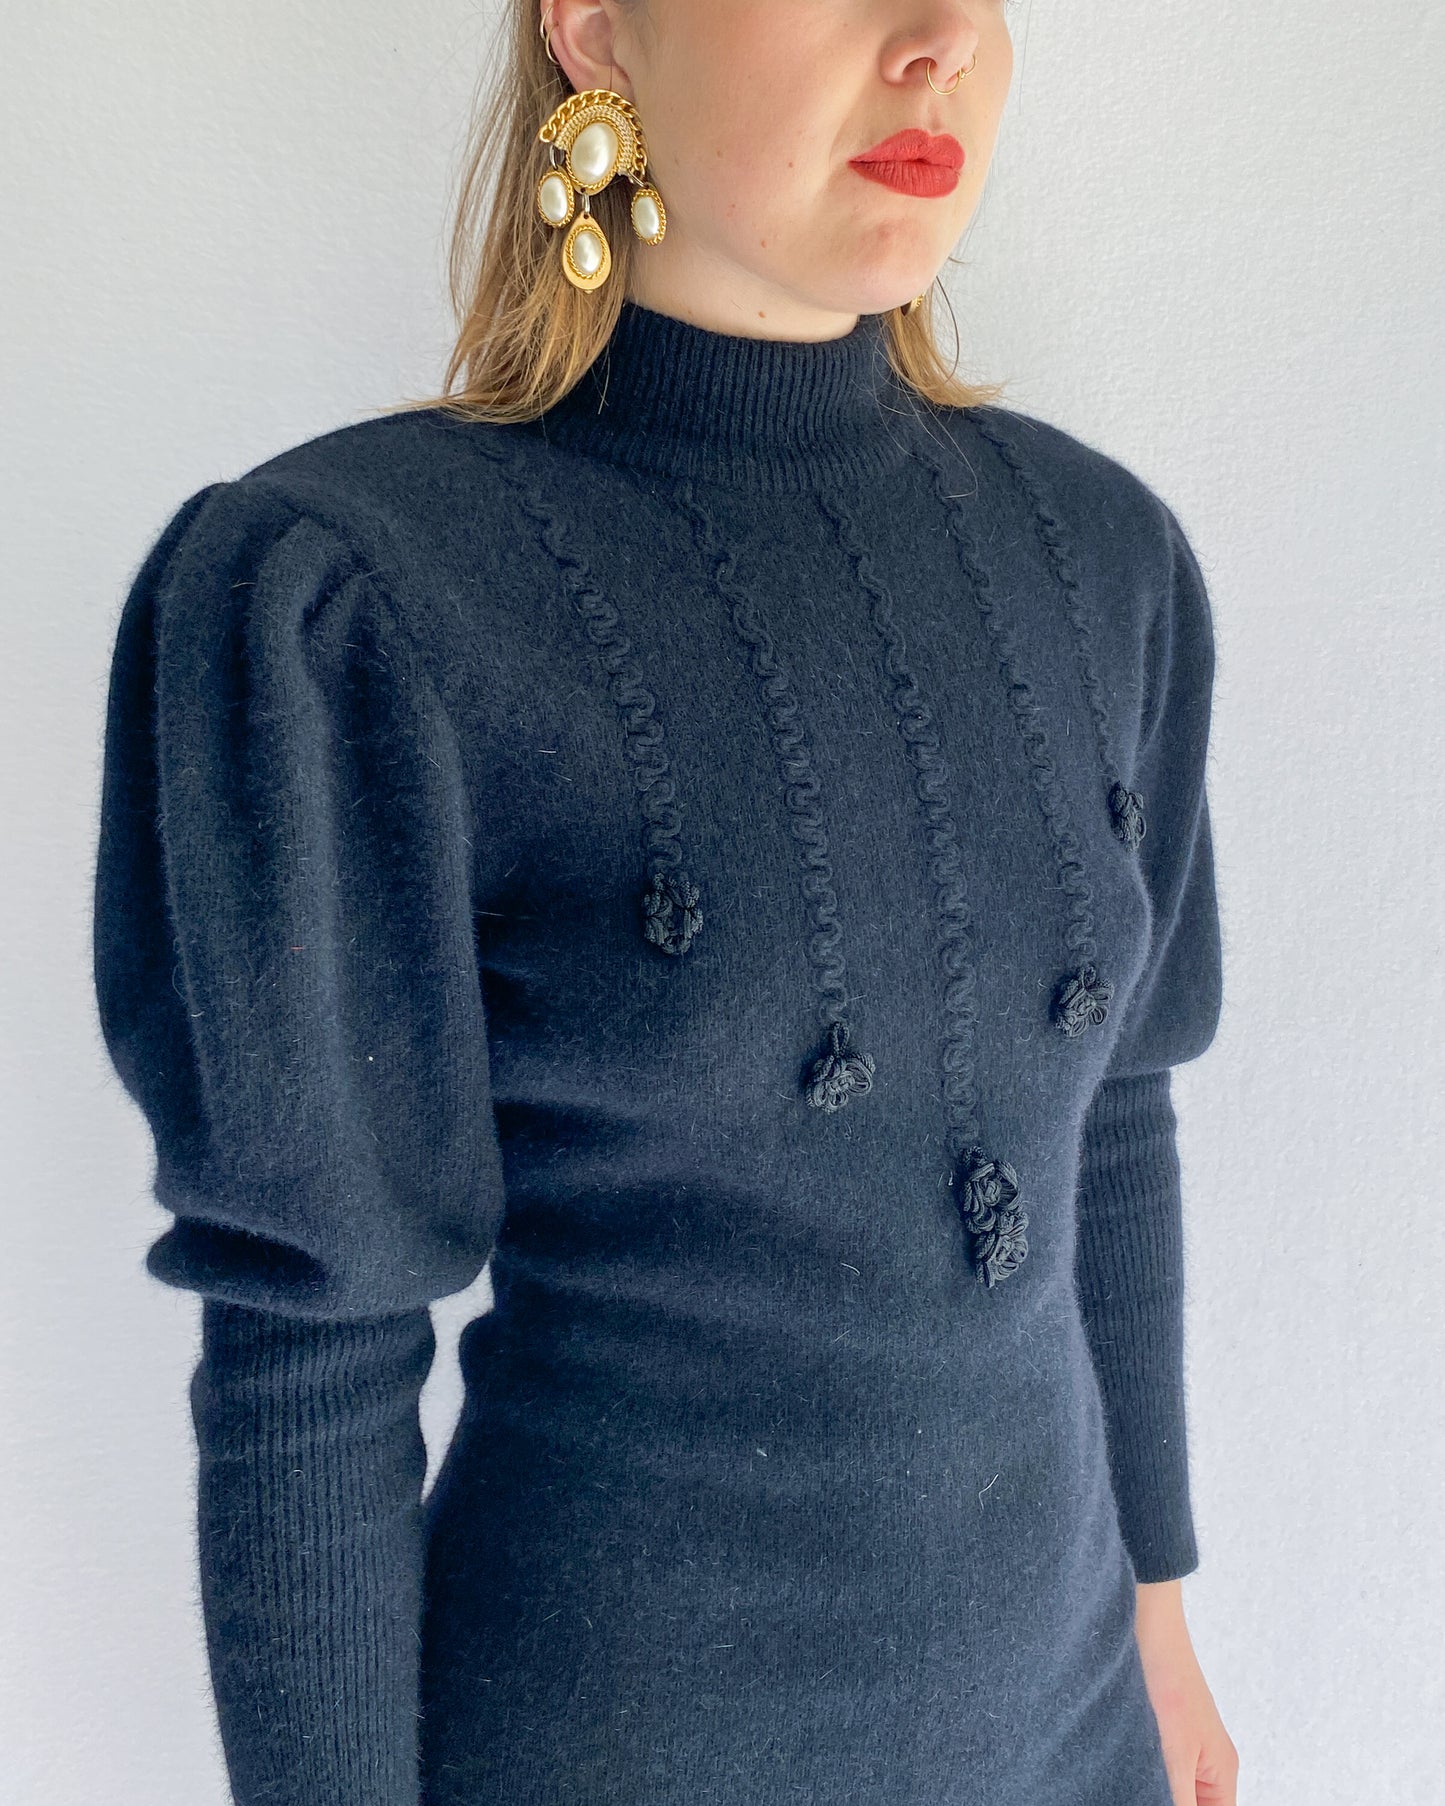 1980s Black Knit Dress with Mutton Sleeves | 10-12/14